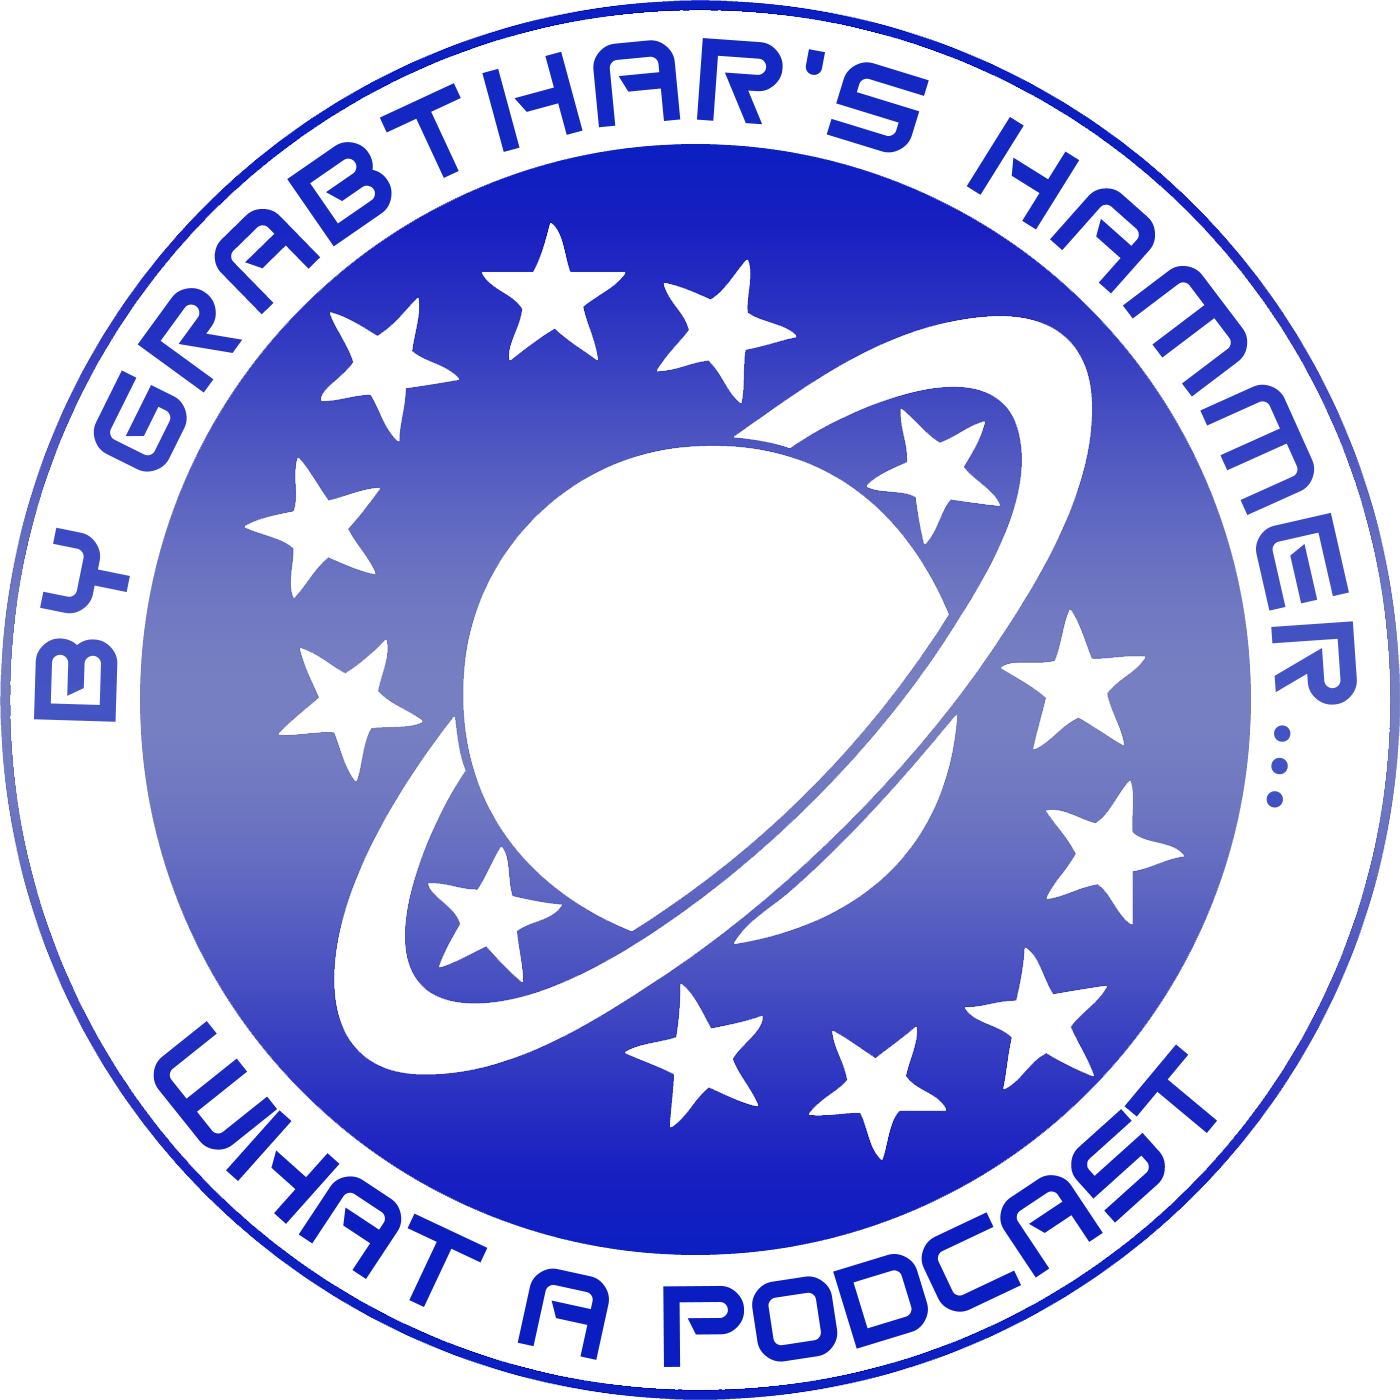 By Grabthar’s Hammer… What A Podcast